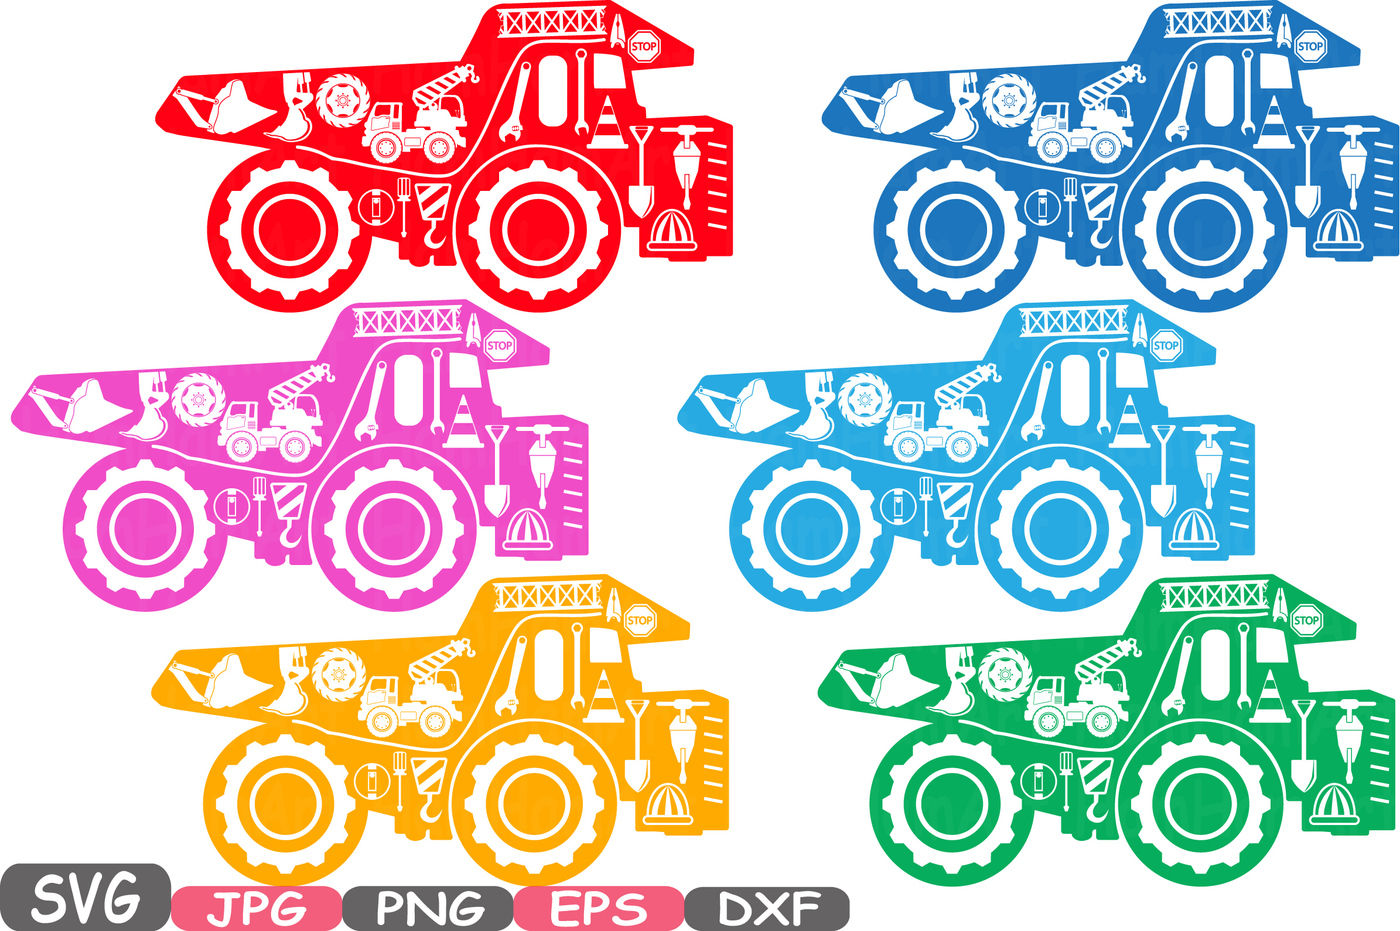 Download Construction Machines Dump Trucks Silhouette Svg File Cutting Files Stickers Builders Construction Site Clipart Building Machine 645s By Hamhamart Thehungryjpeg Com